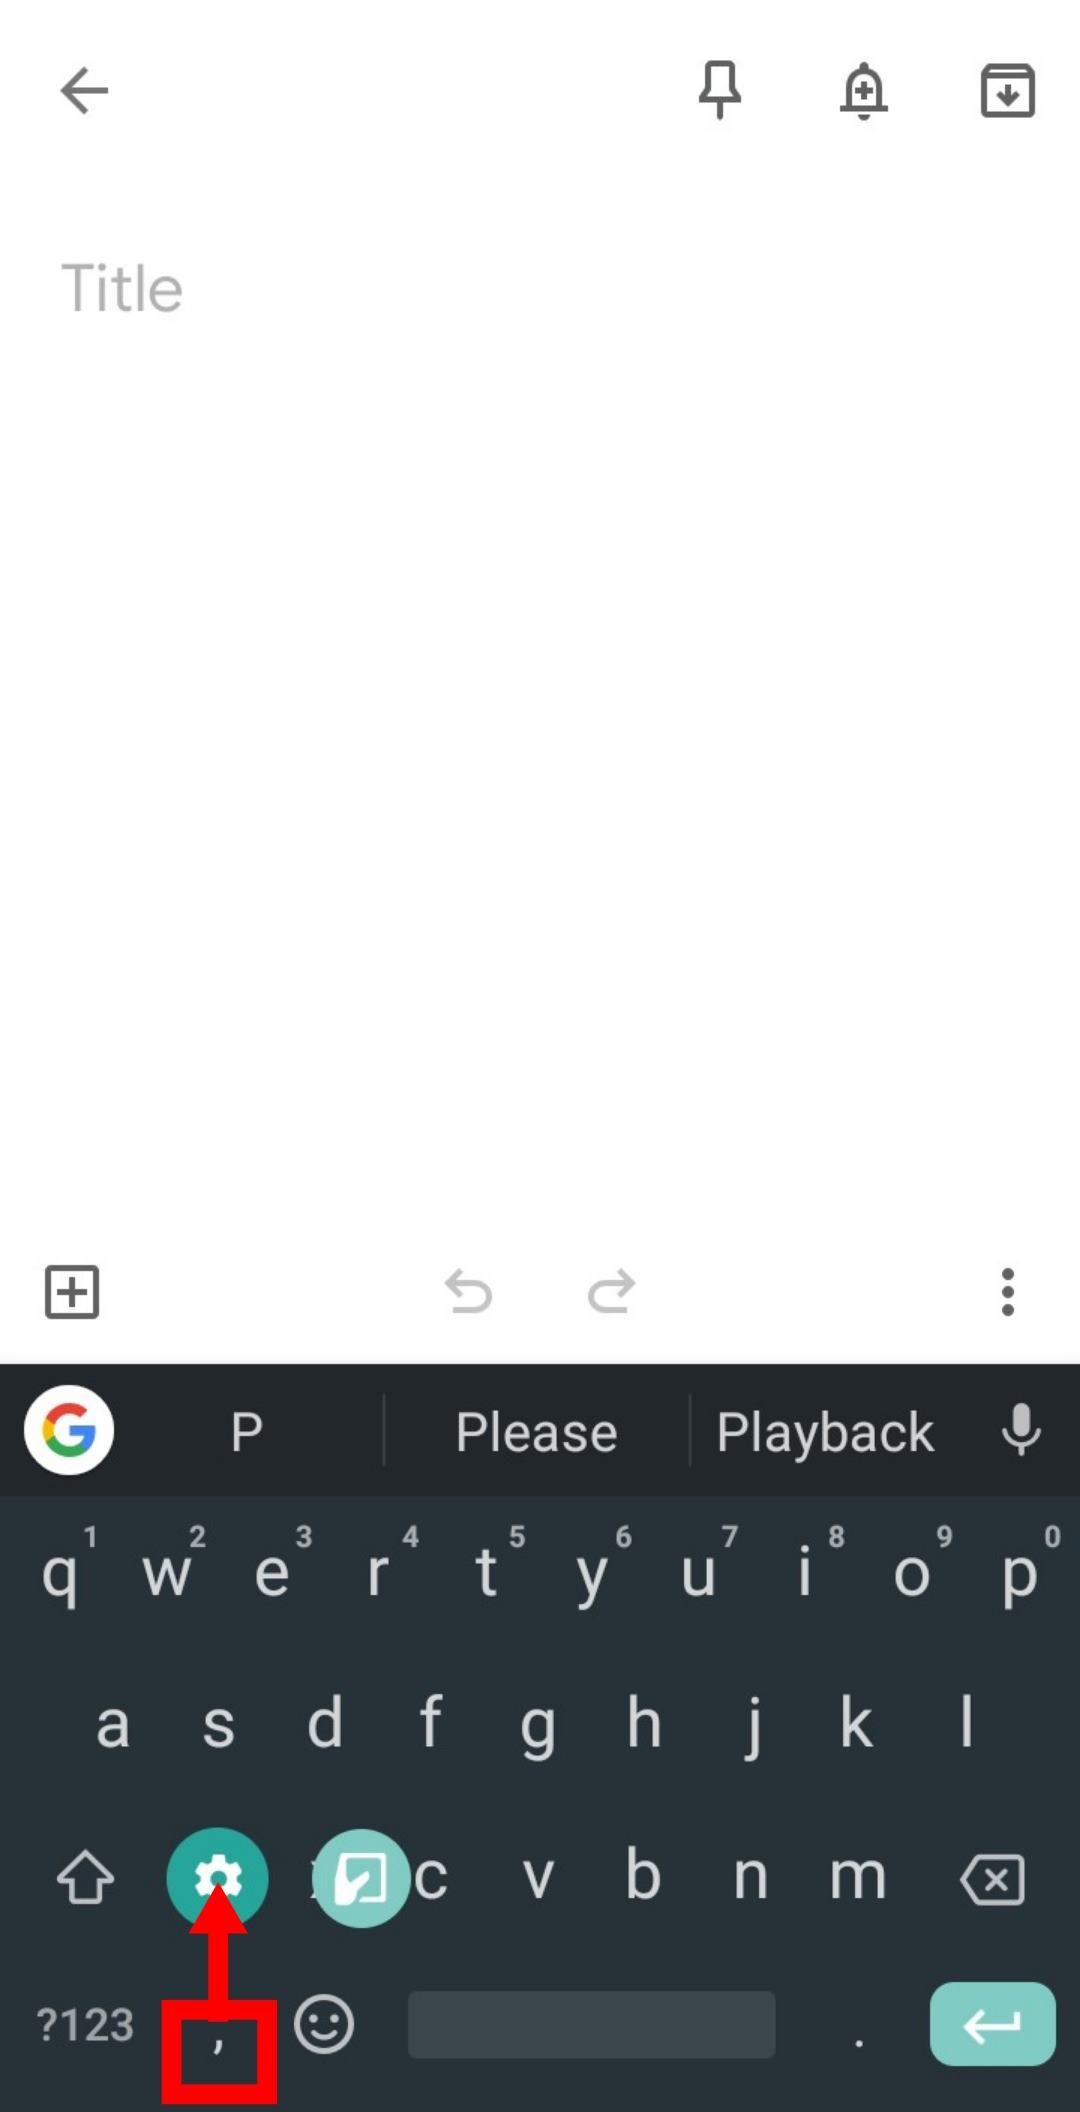 Selecting the cog icon on the Google Keyboard